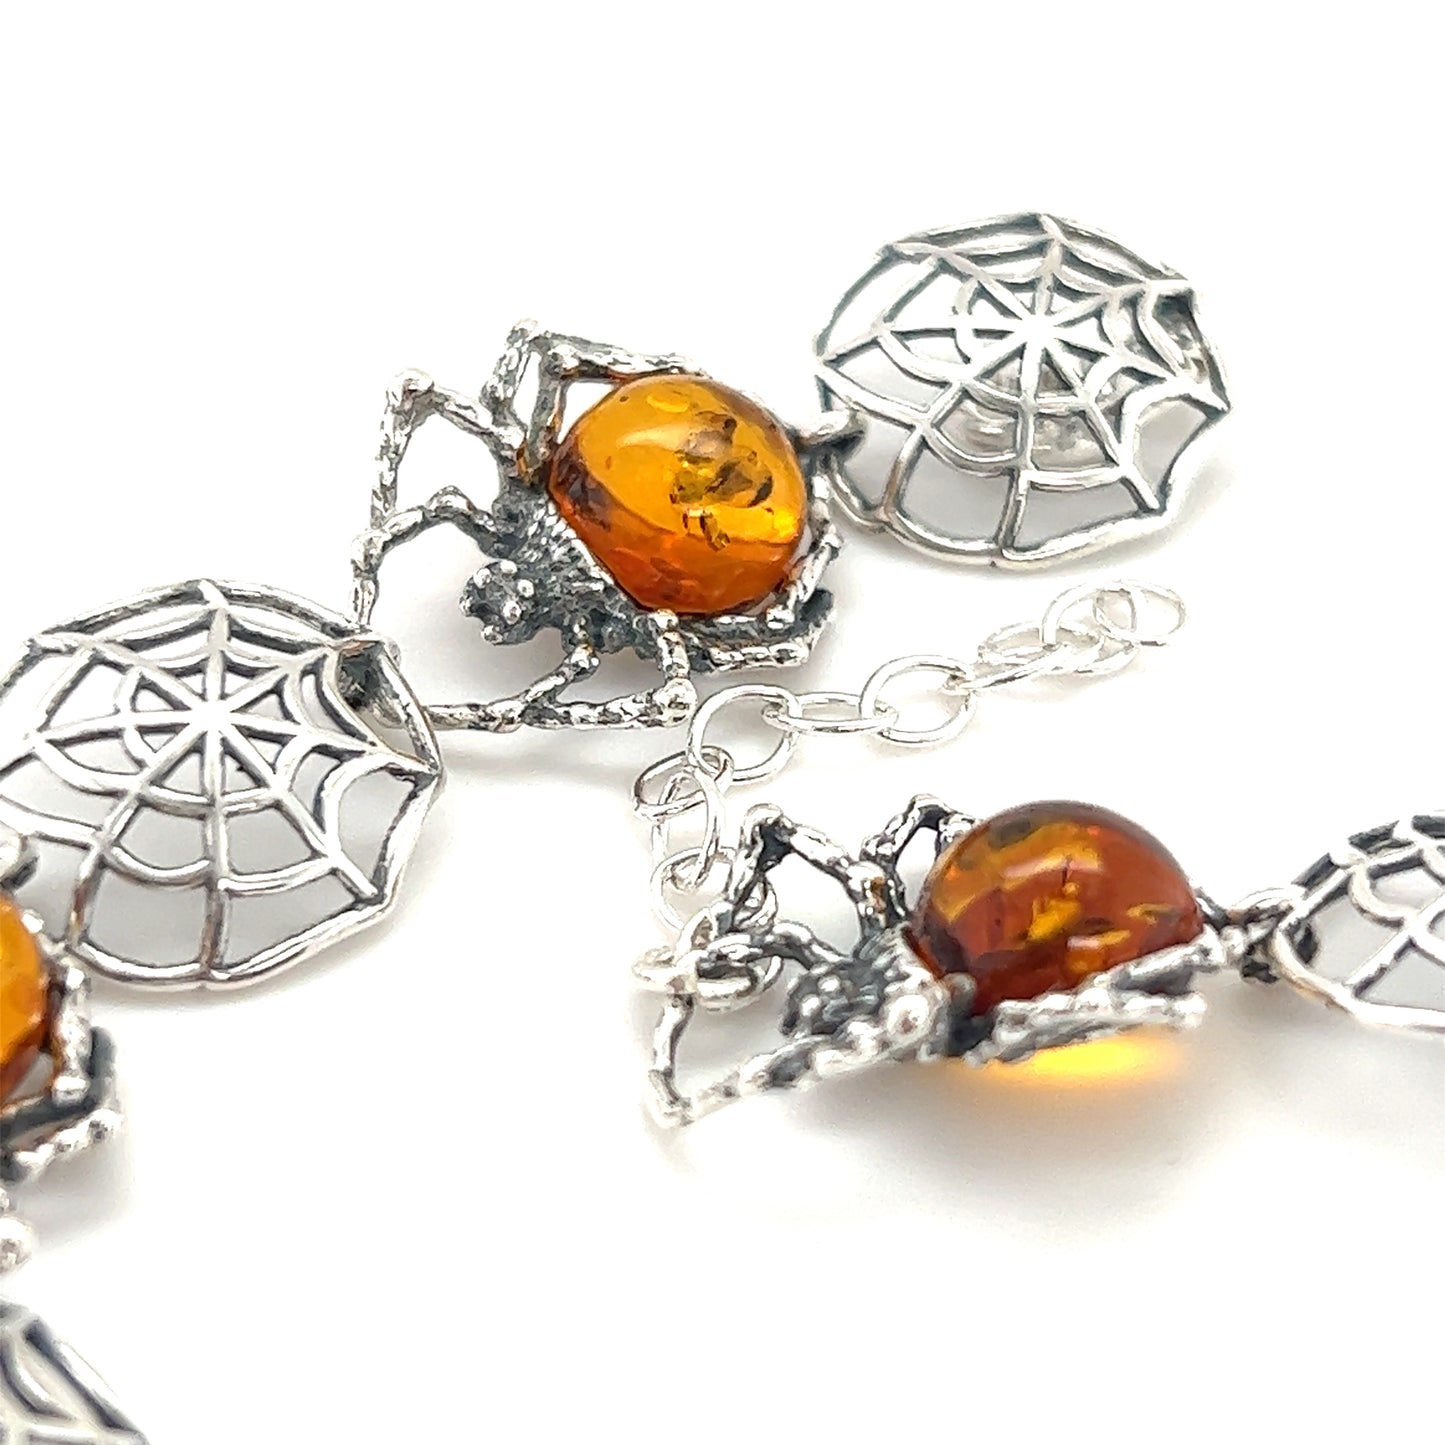 This Spellbinding Amber Spider Bracelet from Super Silver features intricate silverwork details and delicate amber beads, evoking the allure of a spider web.